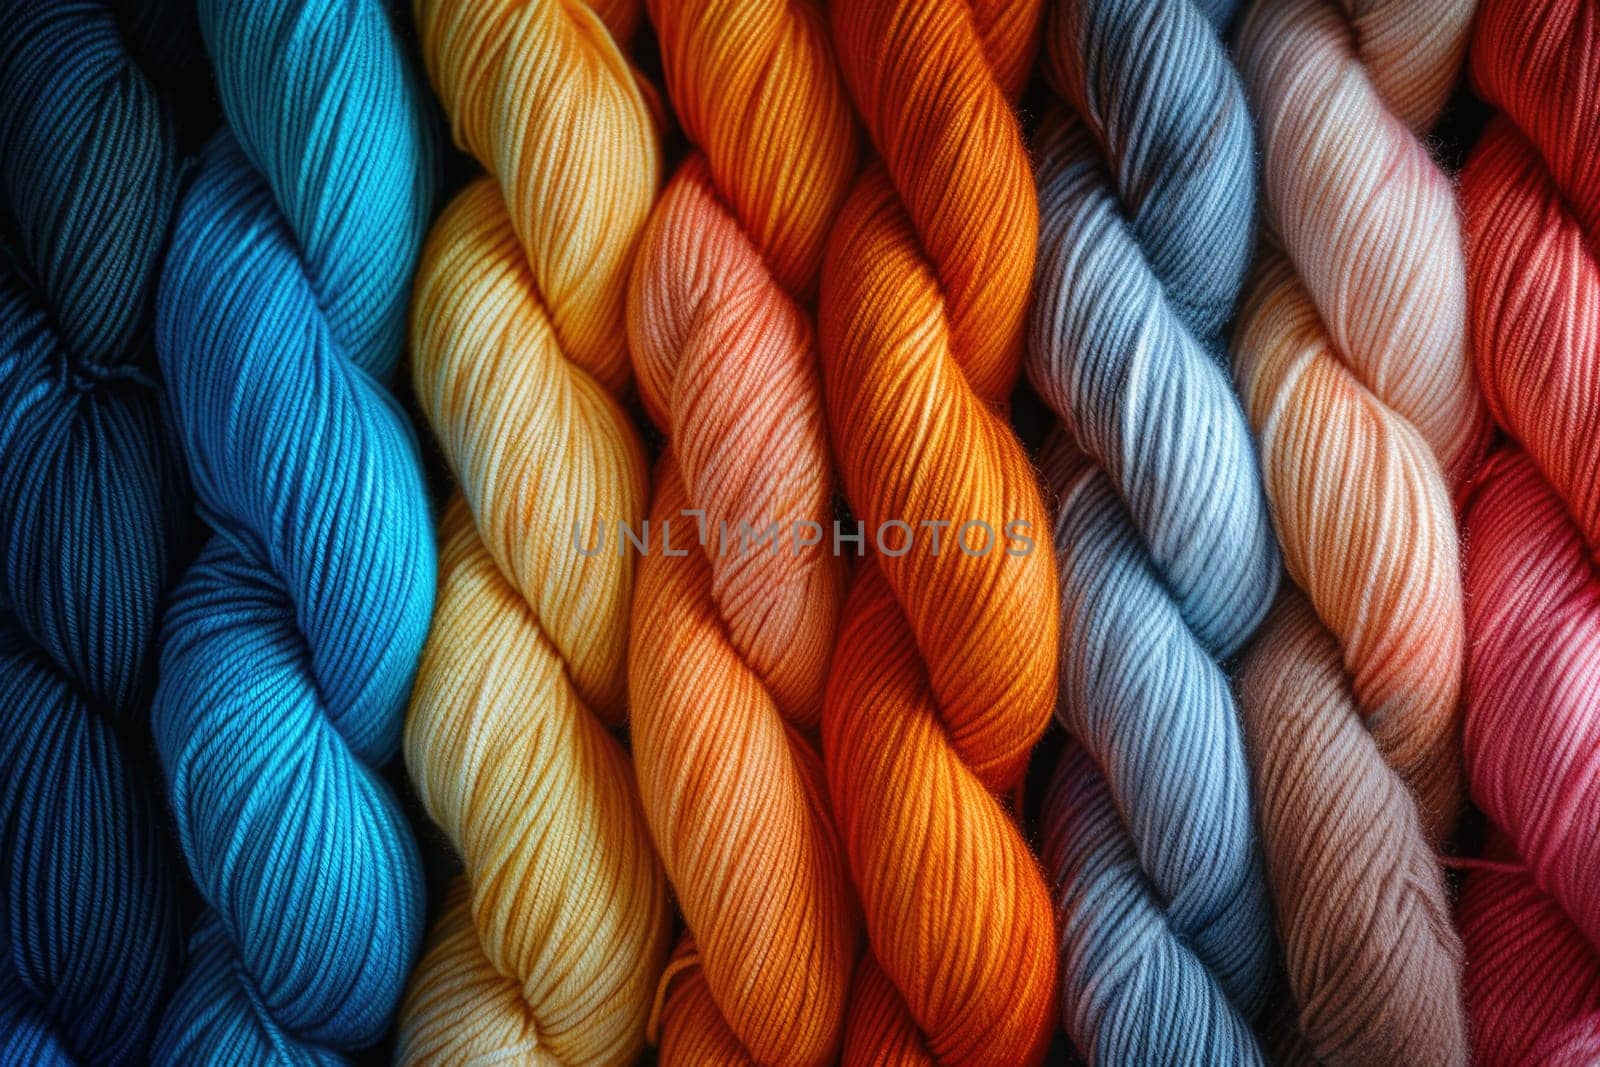 Close-up view of a variety of yarn skeins in different vibrant colors.